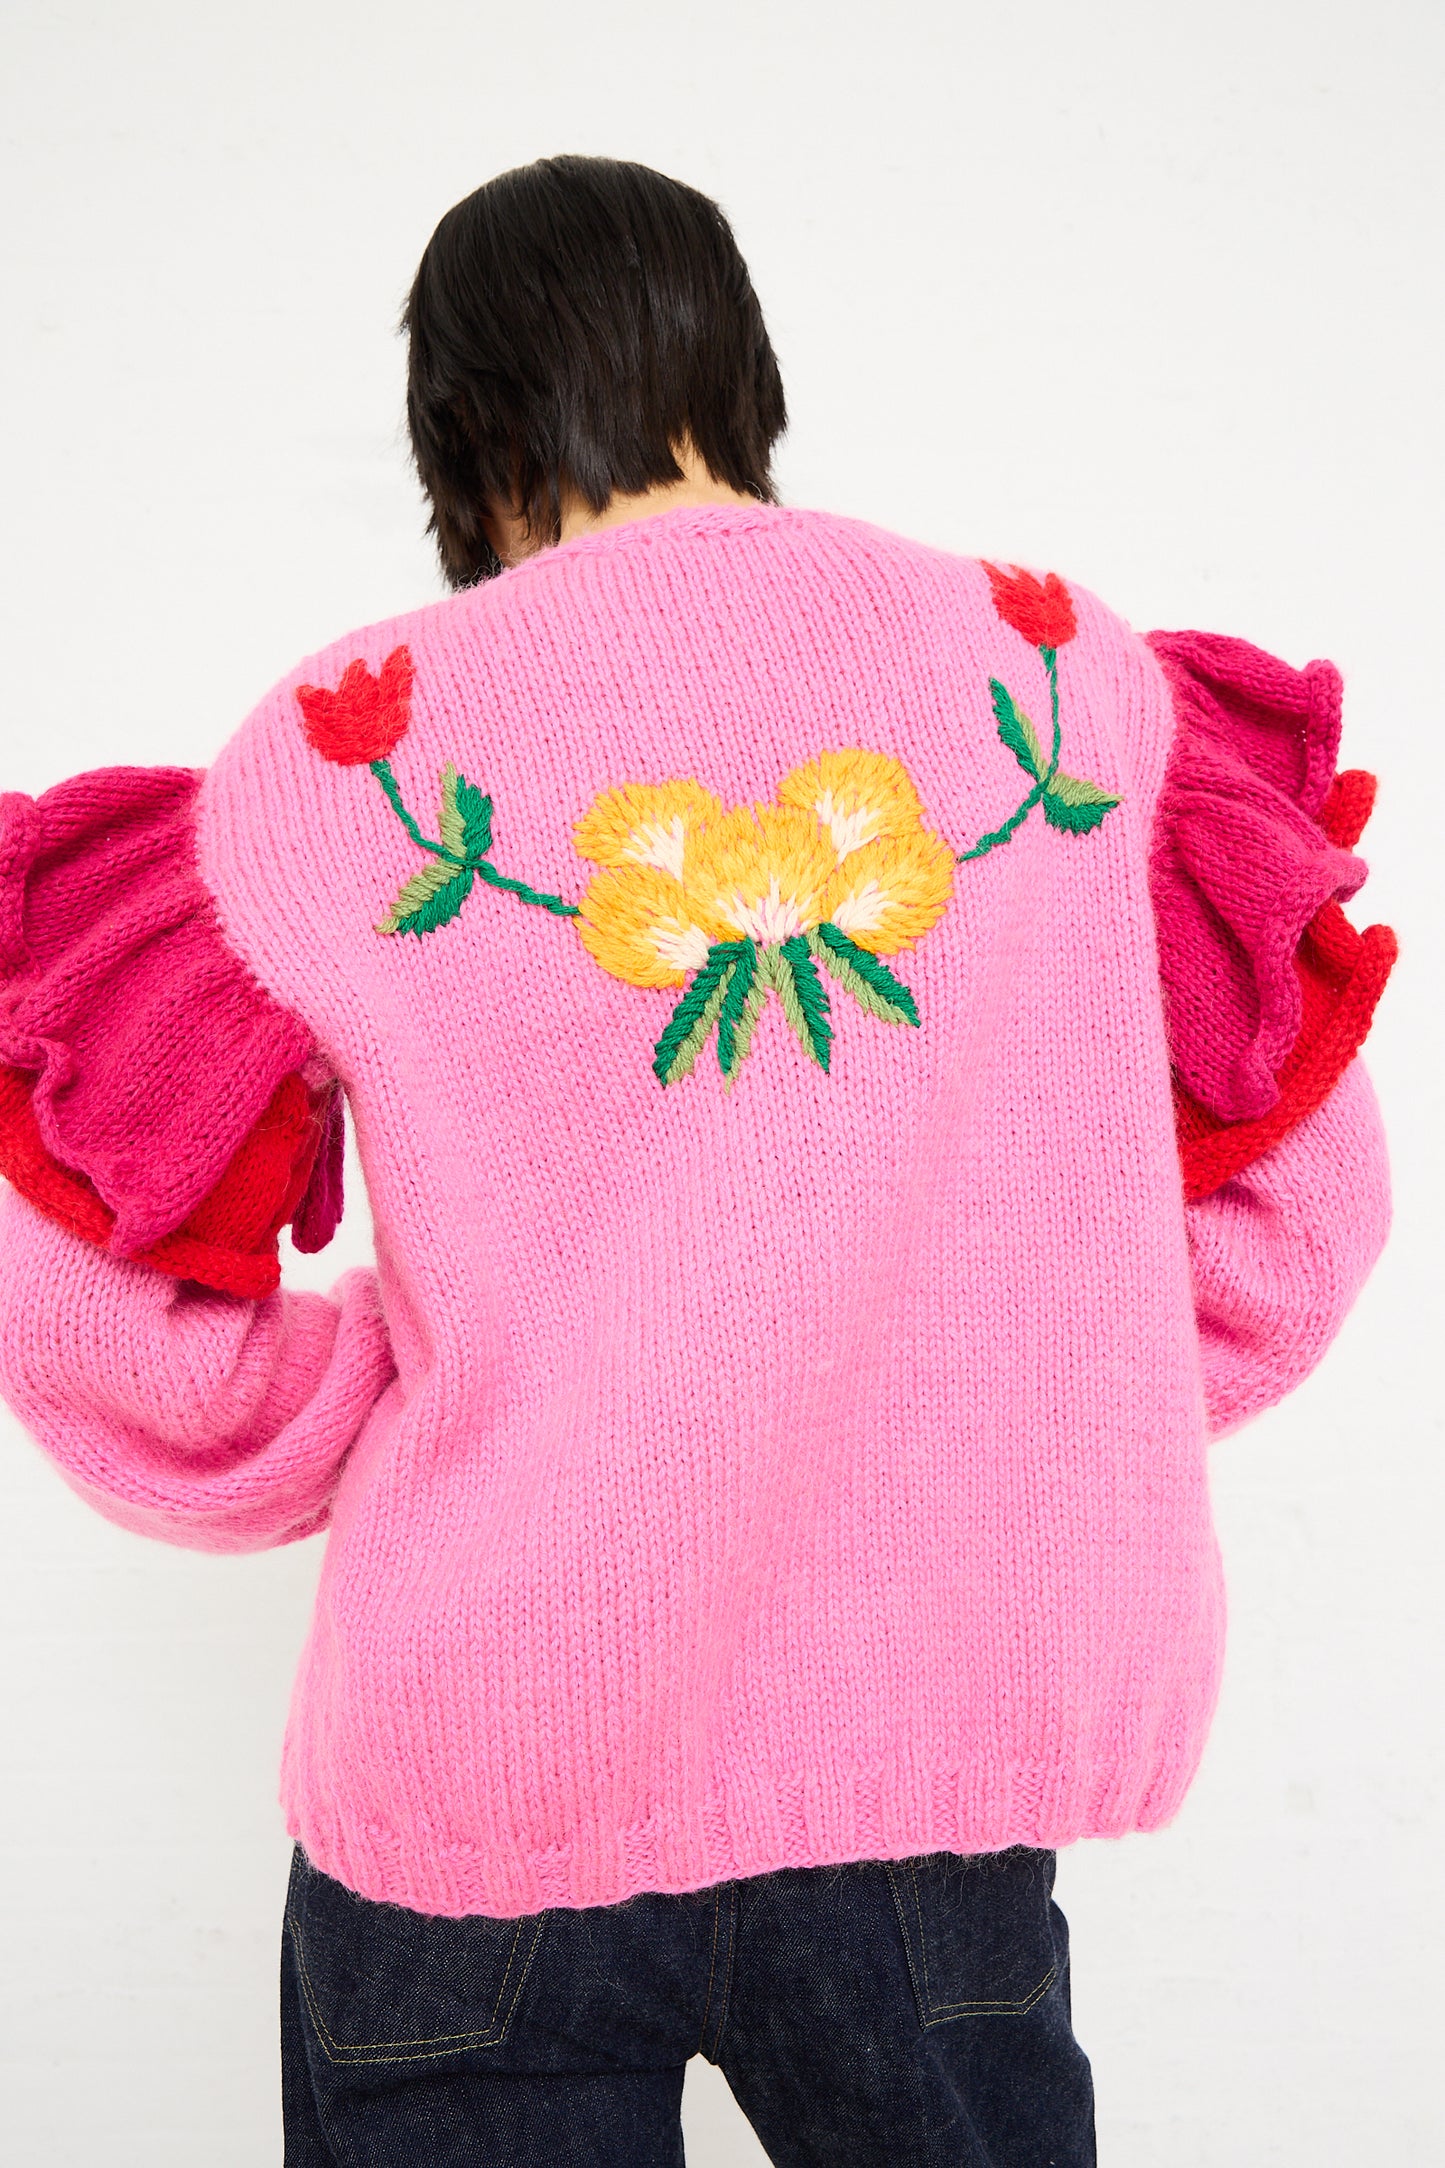 A person from behind wearing a Sofio Gongli pink hand-knit open cardigan with a large yellow flower and green leaves embroidered on it.